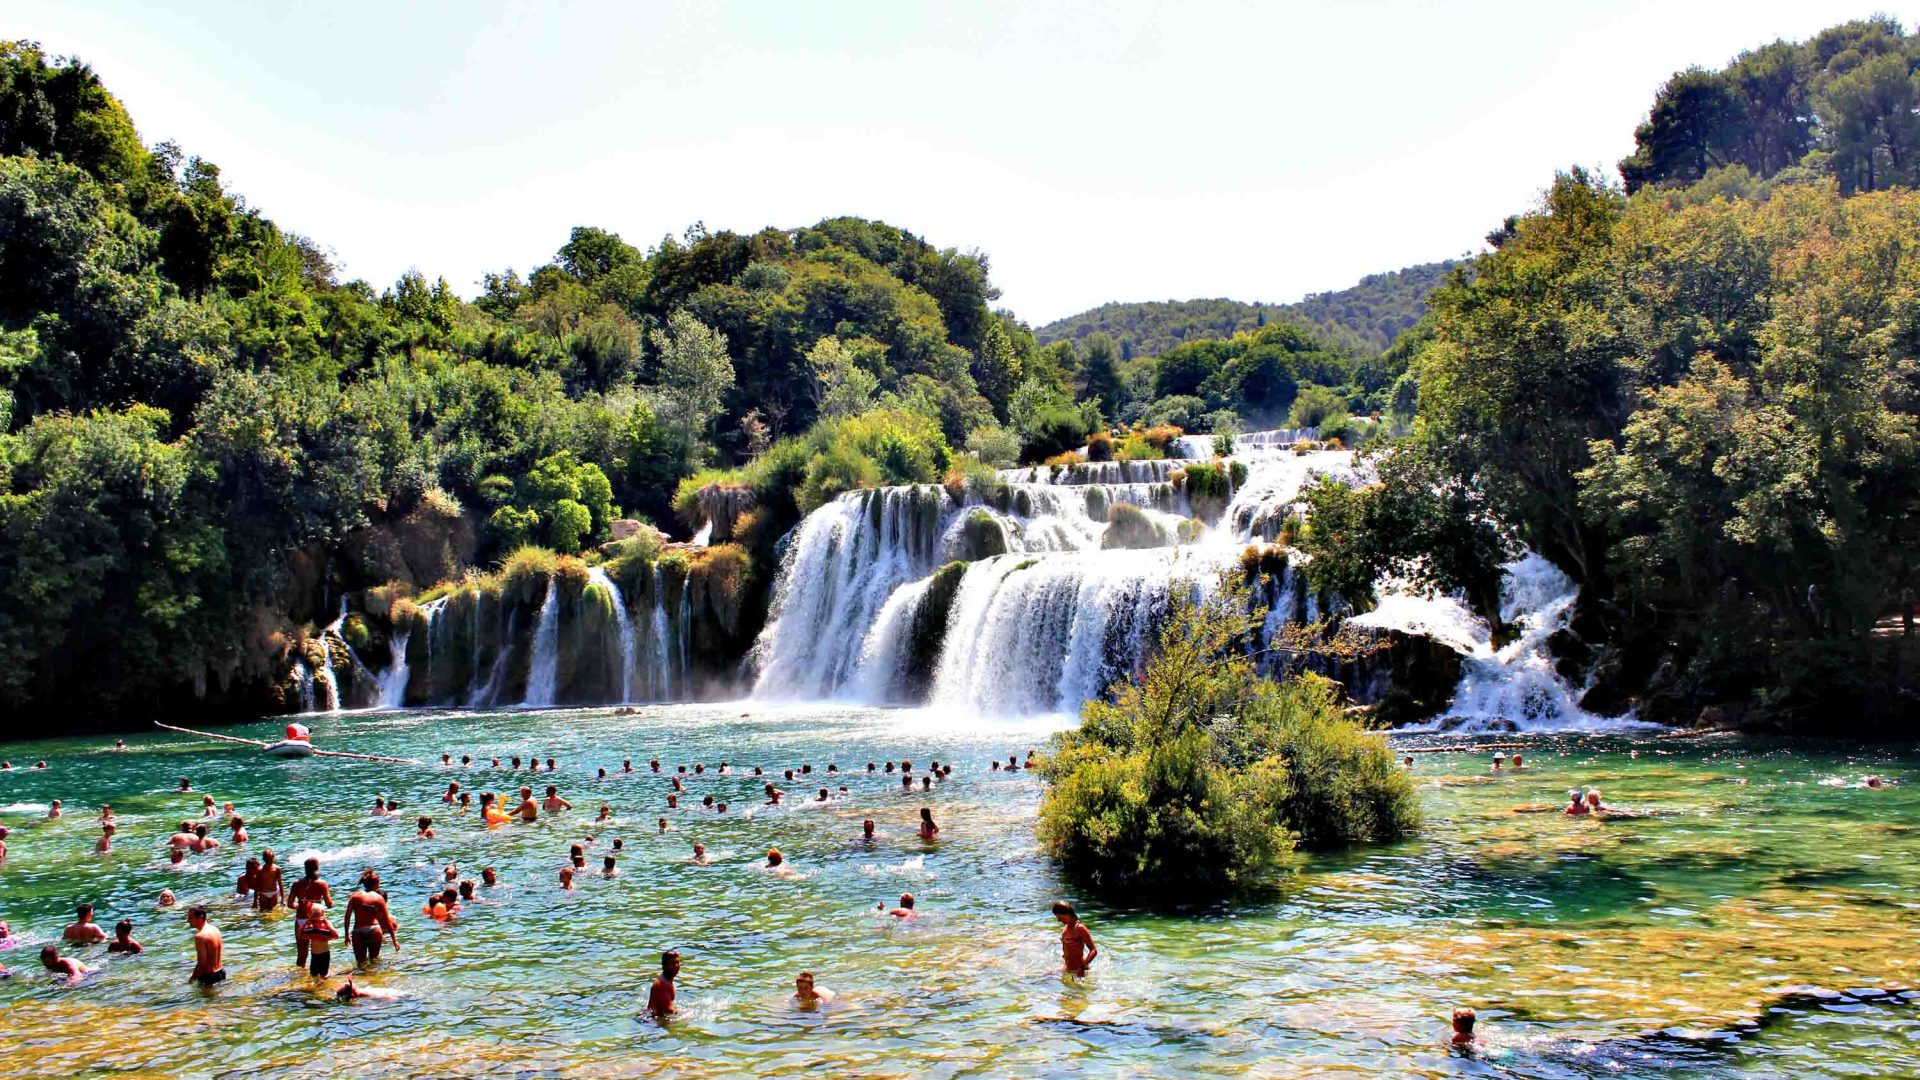 The waterfall Skradinski Buk with tourists swimming in the water.